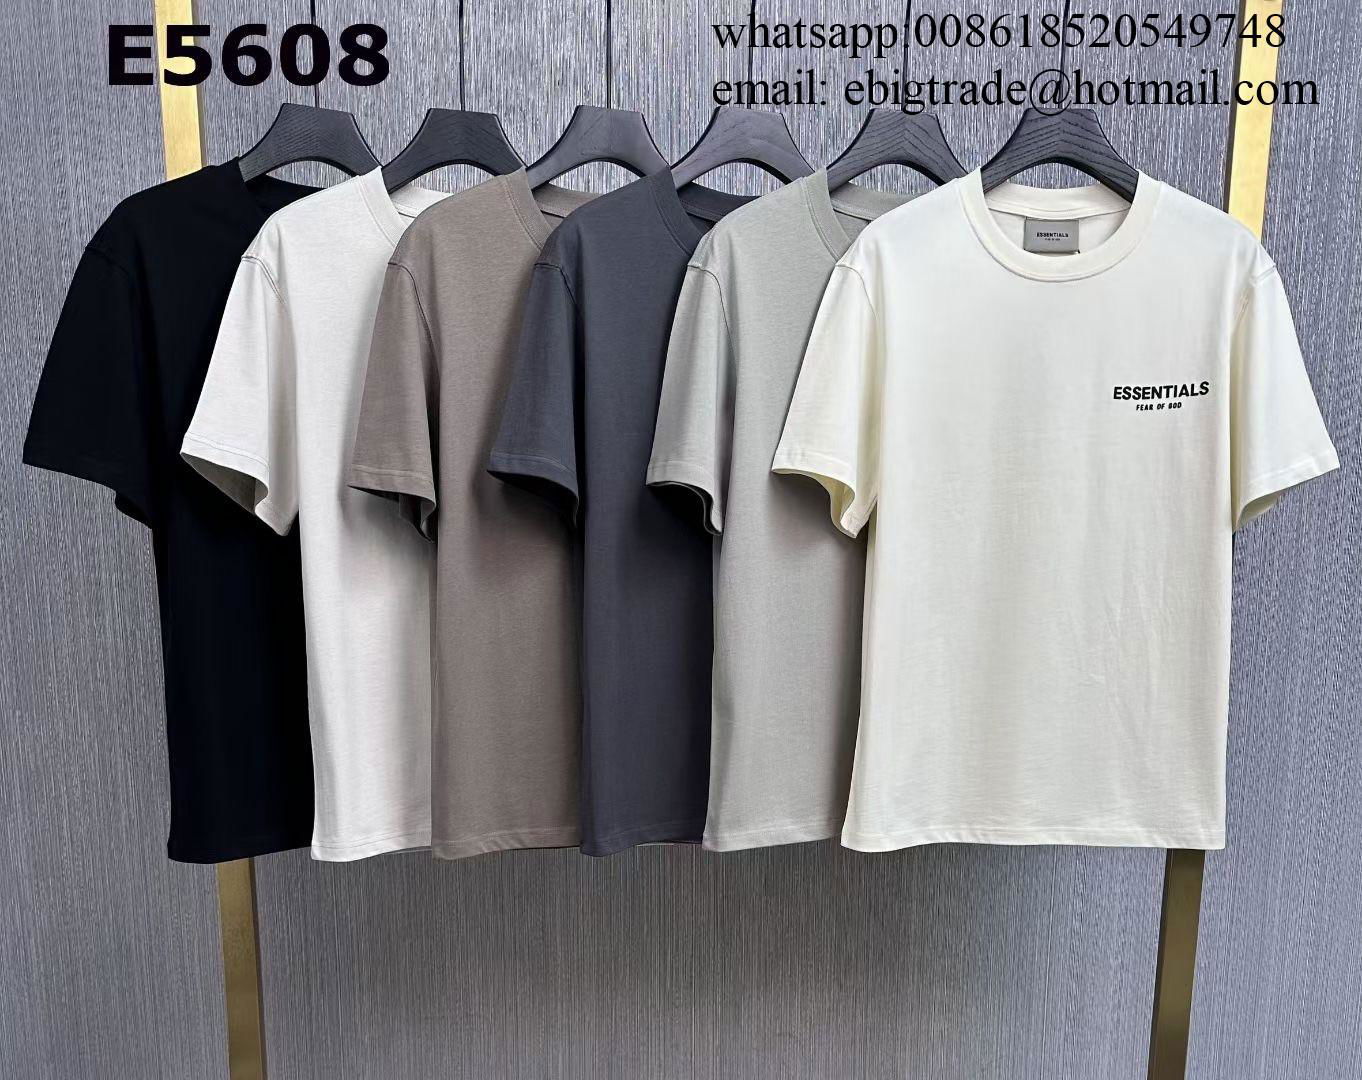 Wholesale Fear of God Essentials T-shirt for men ESSENTIALS FEAR OF GOD Hoodies 4